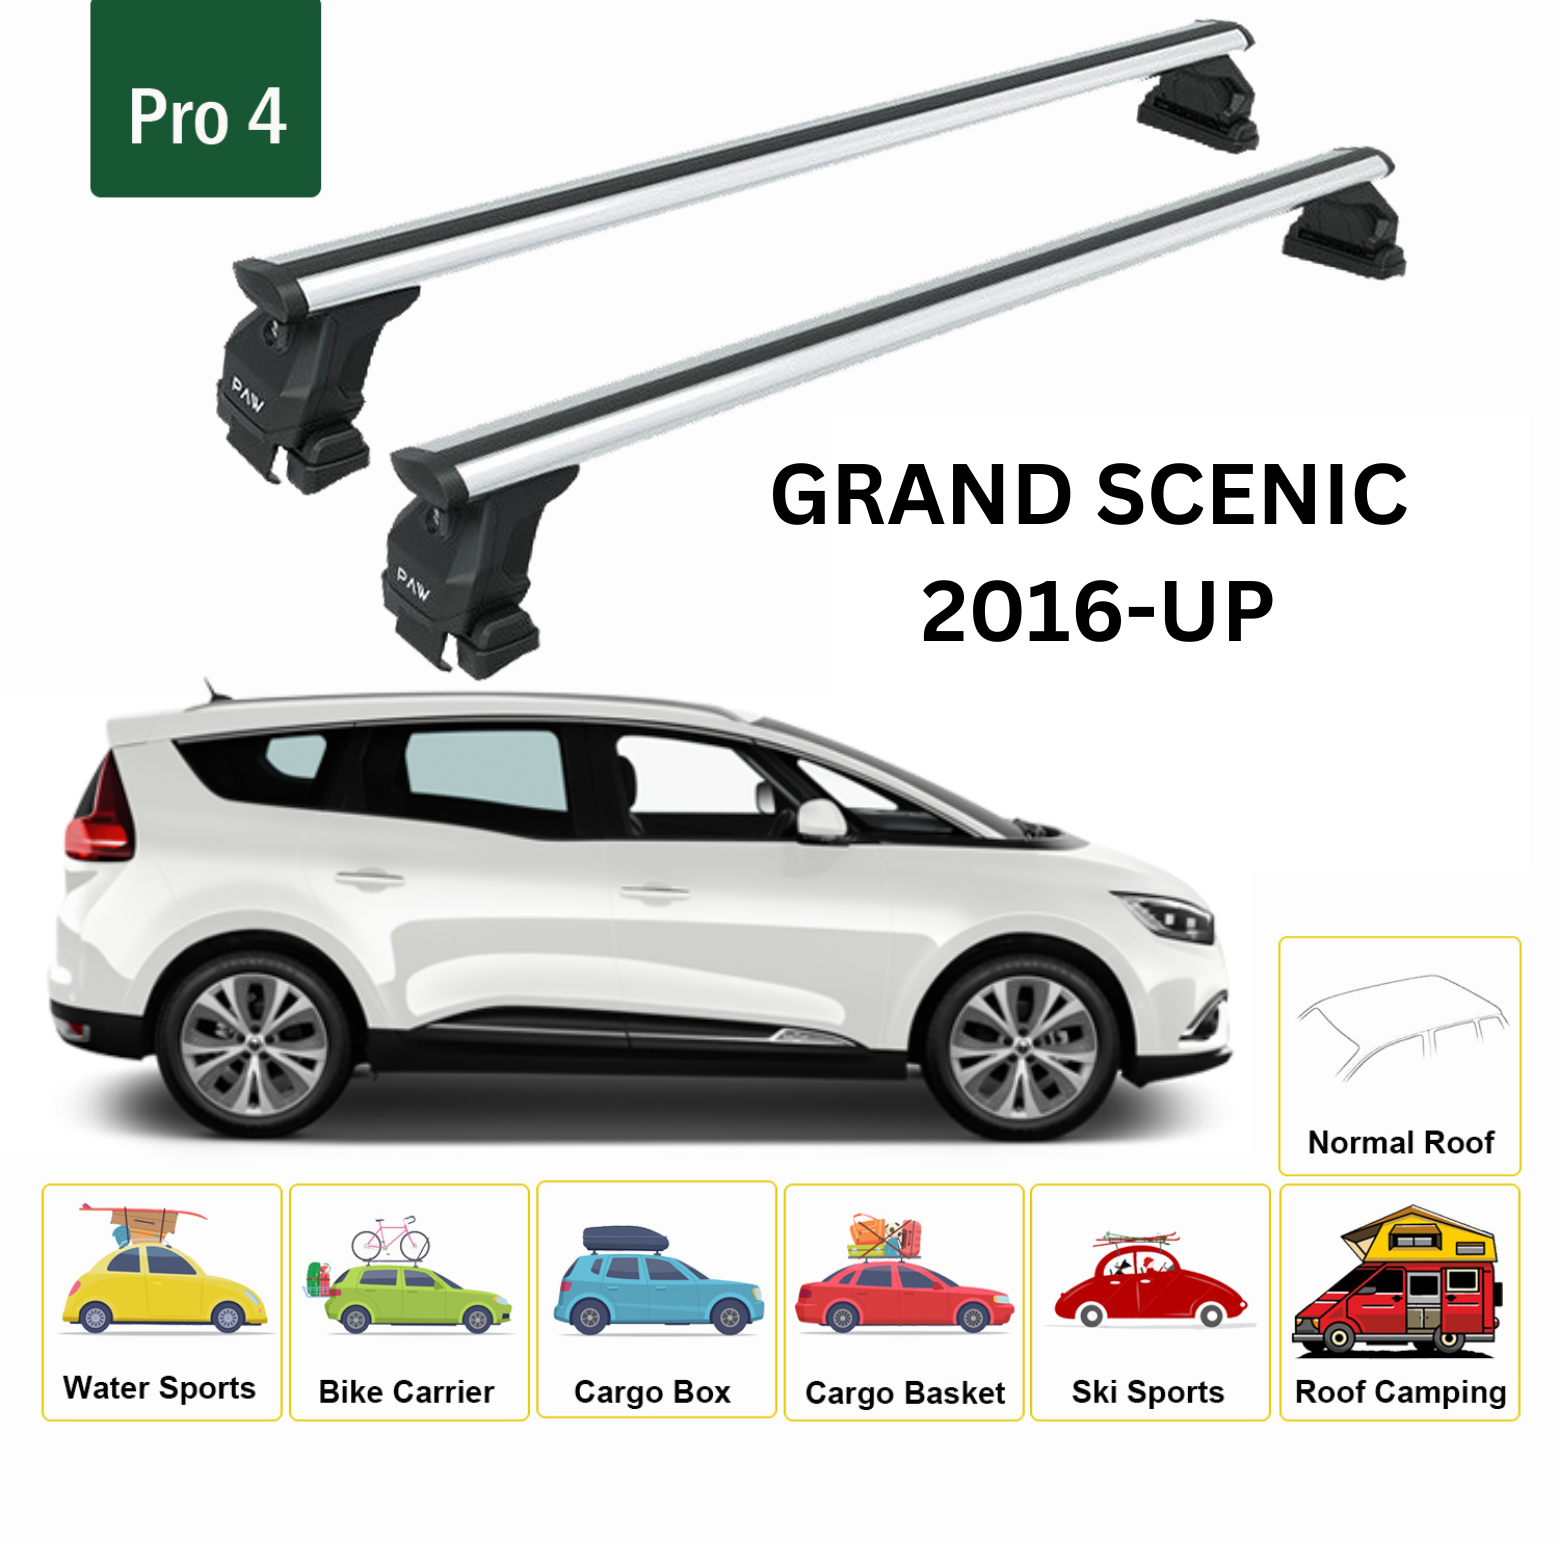 For Renault Grand Scenic 2016-Up Roof Rack System, Aluminium Cross Bar, Metal Bracket, Normal Roof, Silver - 0